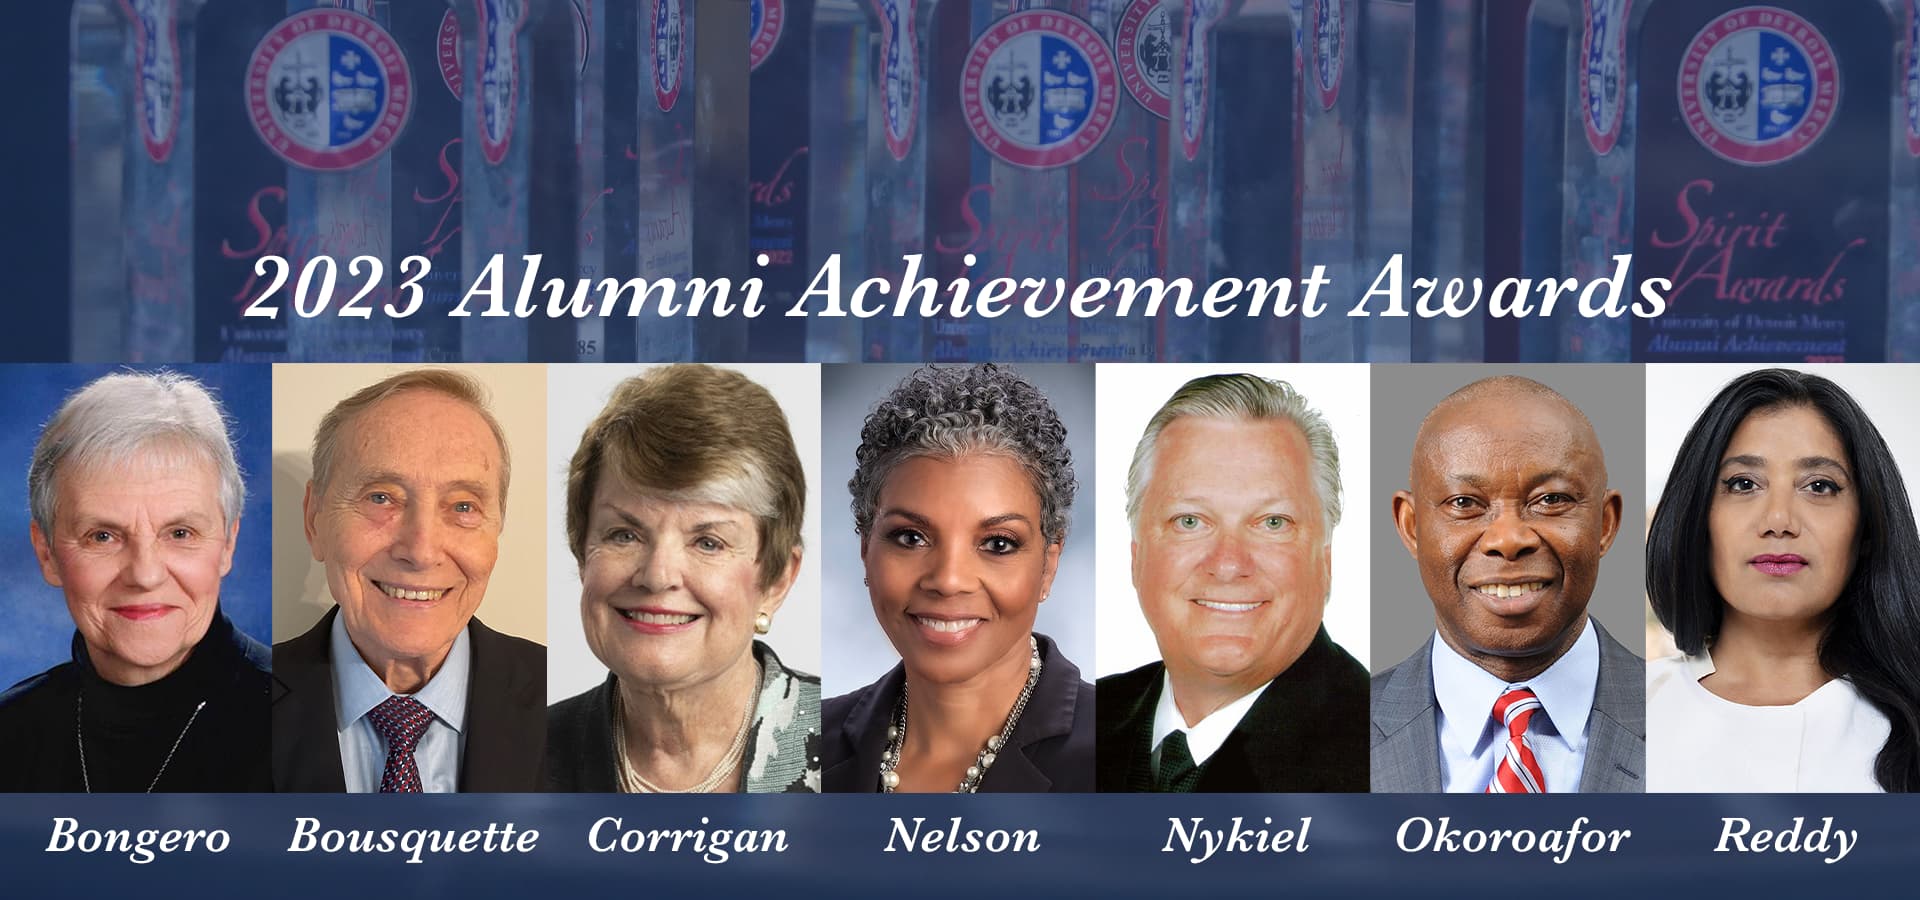 A graphic featuring the text 2023 Alumni Achievement Awards, with photos of the seven winners and their names below.